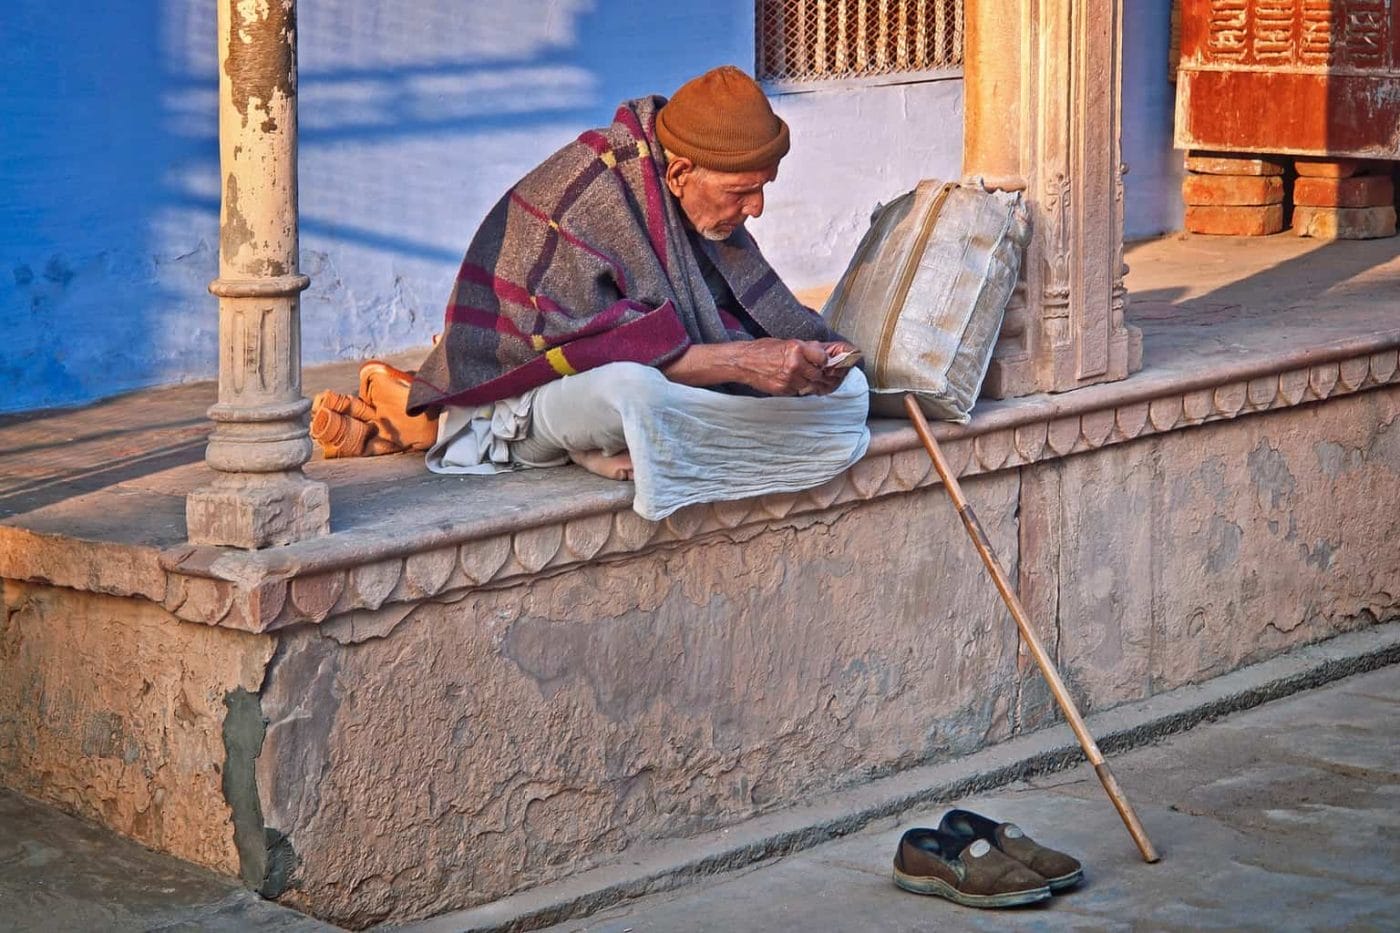 An old man sitting on a wall with a cane and shoes on the ground